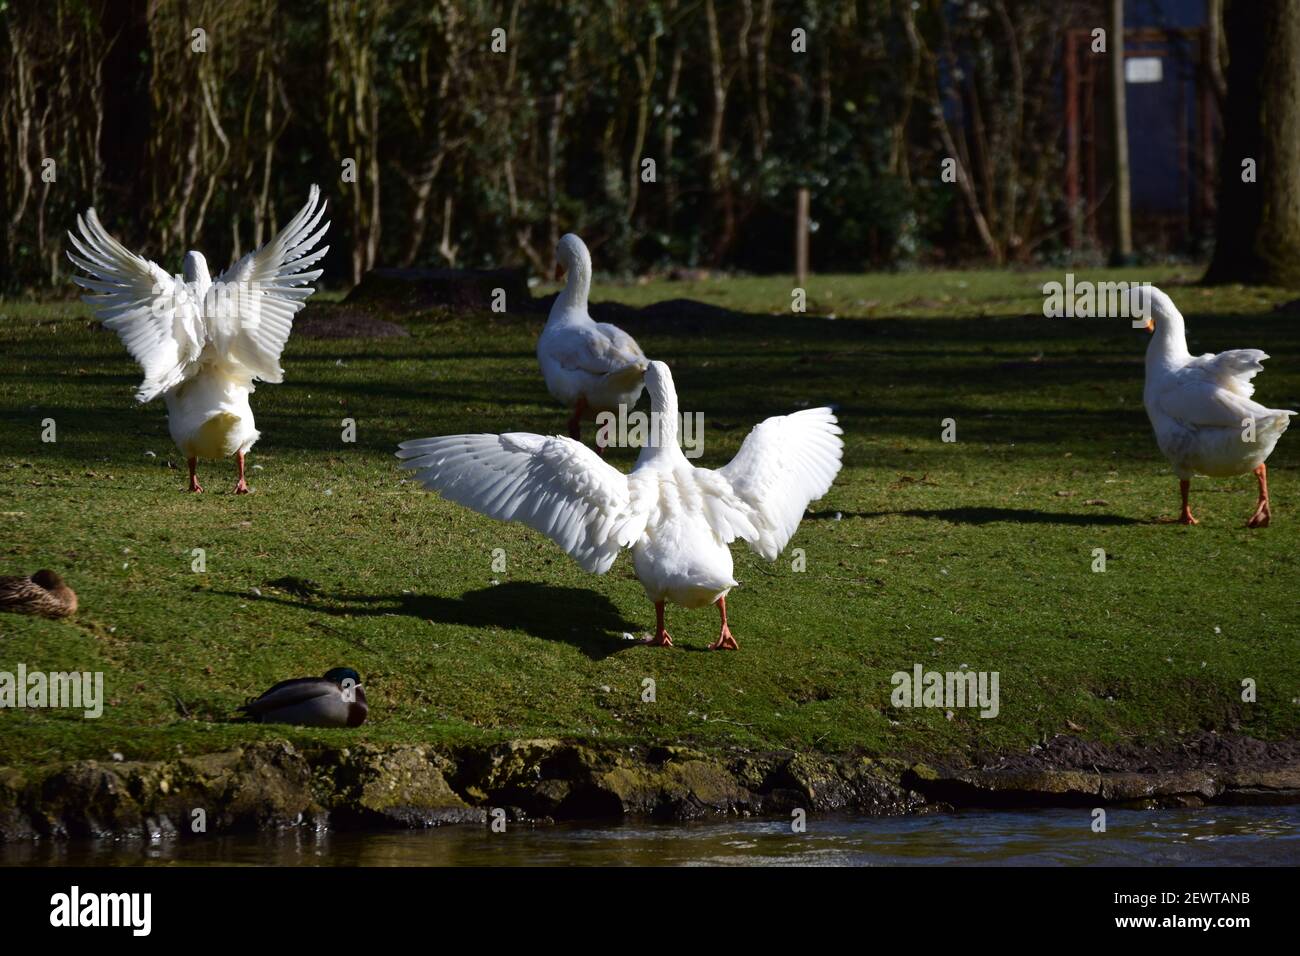 Two white geese are standing on the lawn spread her plumage Stock Photo